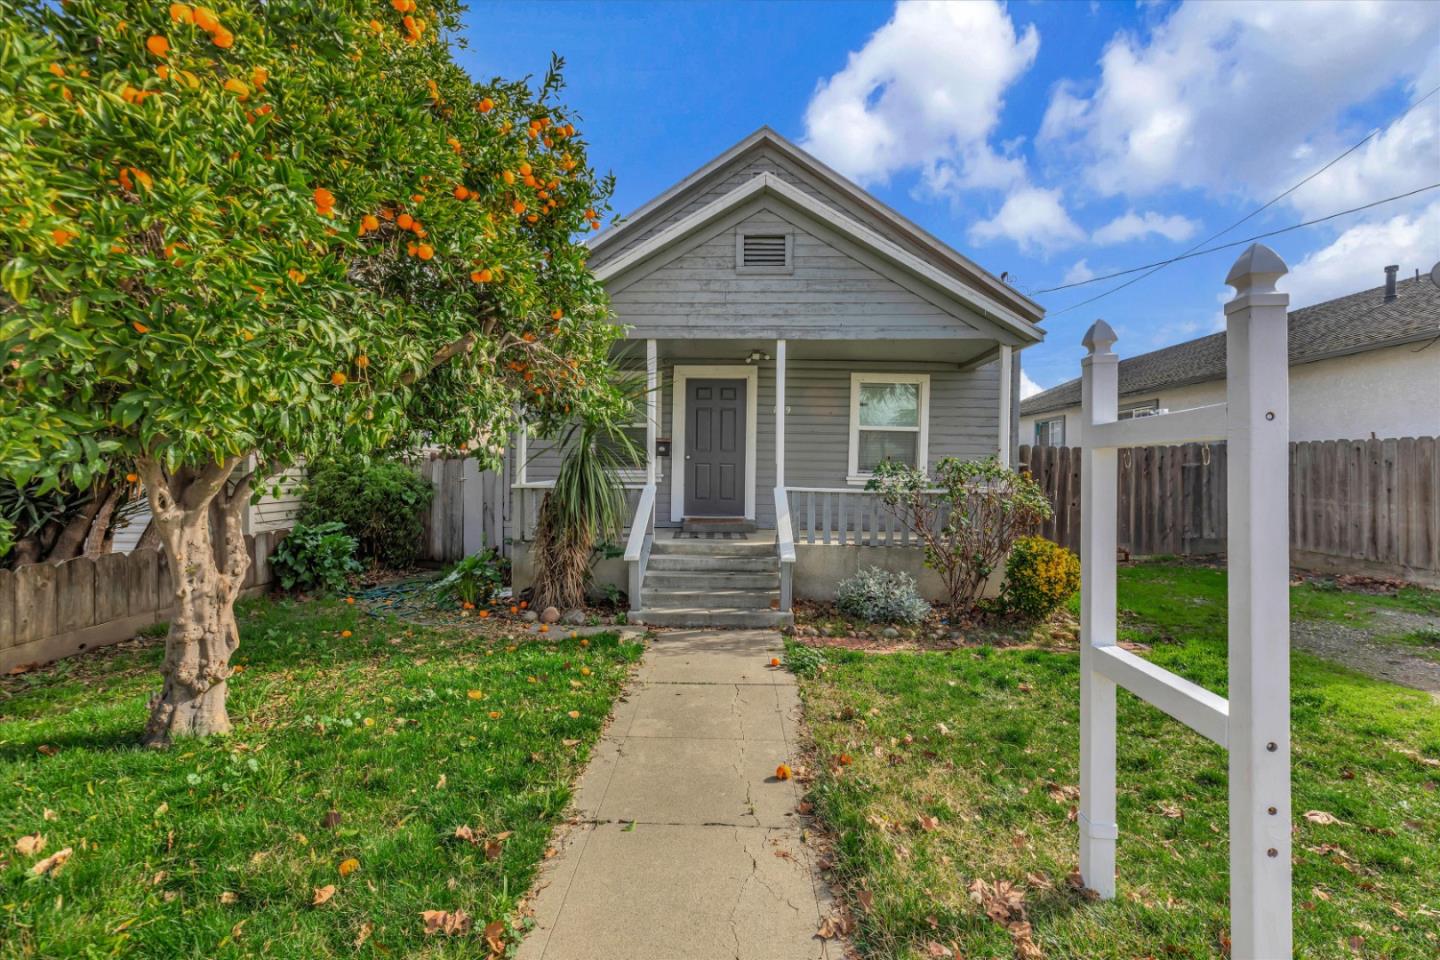 Photo of 1139 Monterey St in Hollister, CA